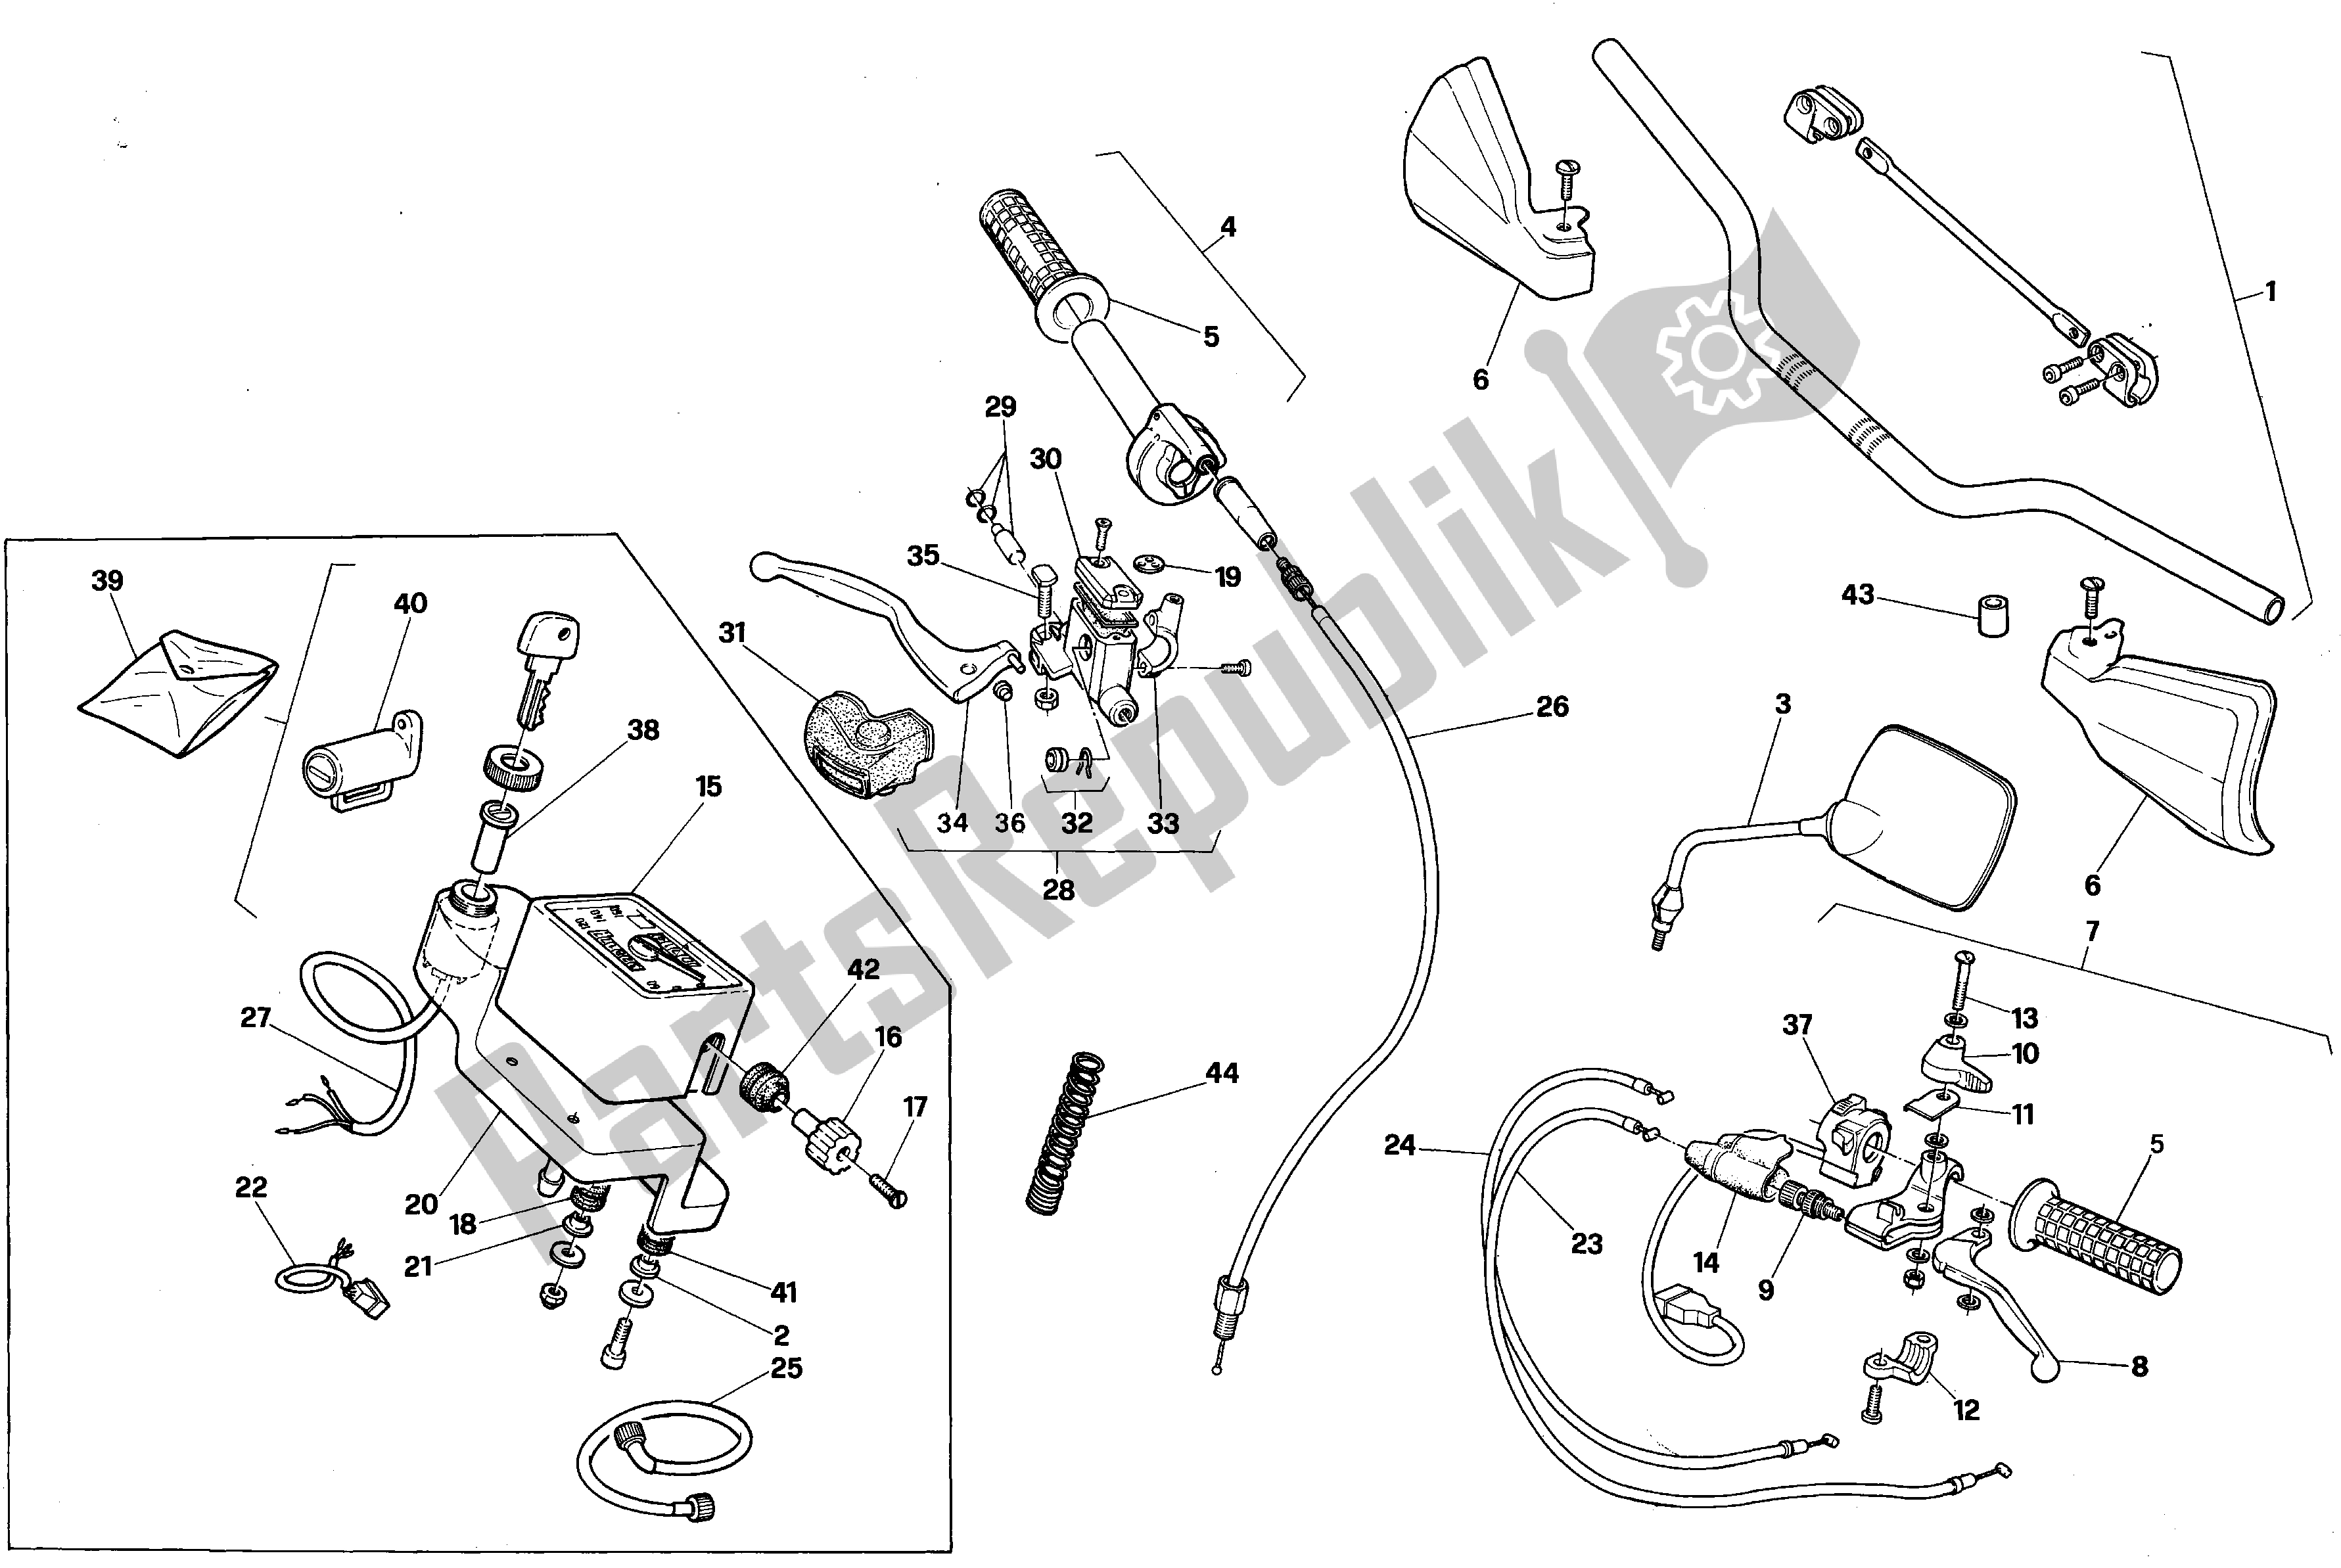 All parts for the Handle Bars And Commands of the Aprilia RX 125 1991